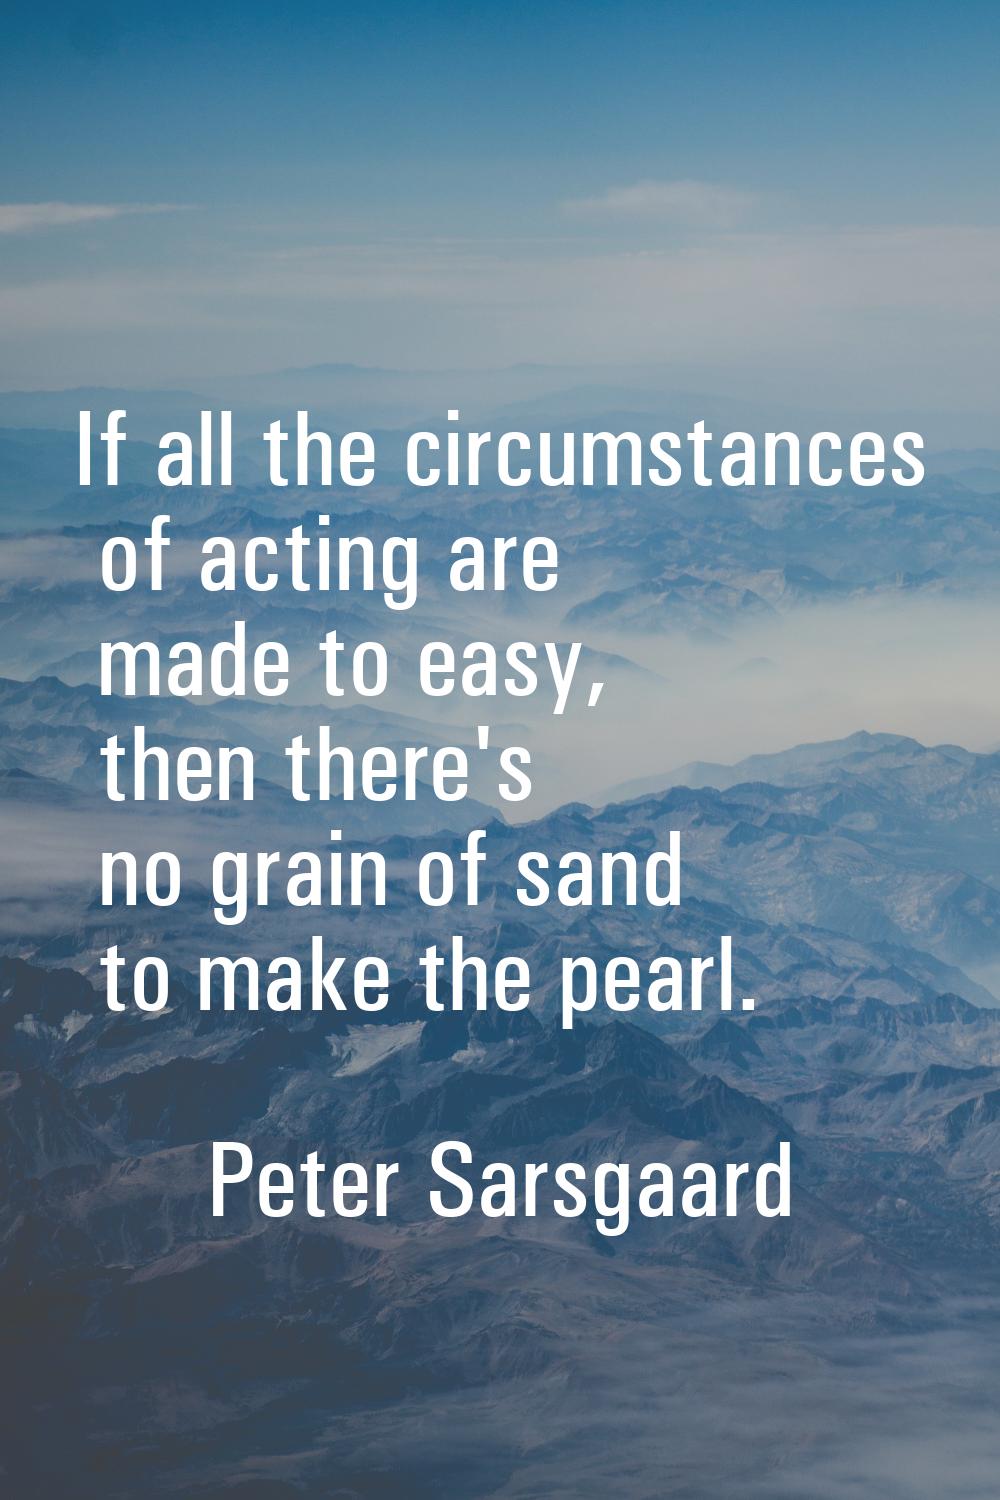 If all the circumstances of acting are made to easy, then there's no grain of sand to make the pear